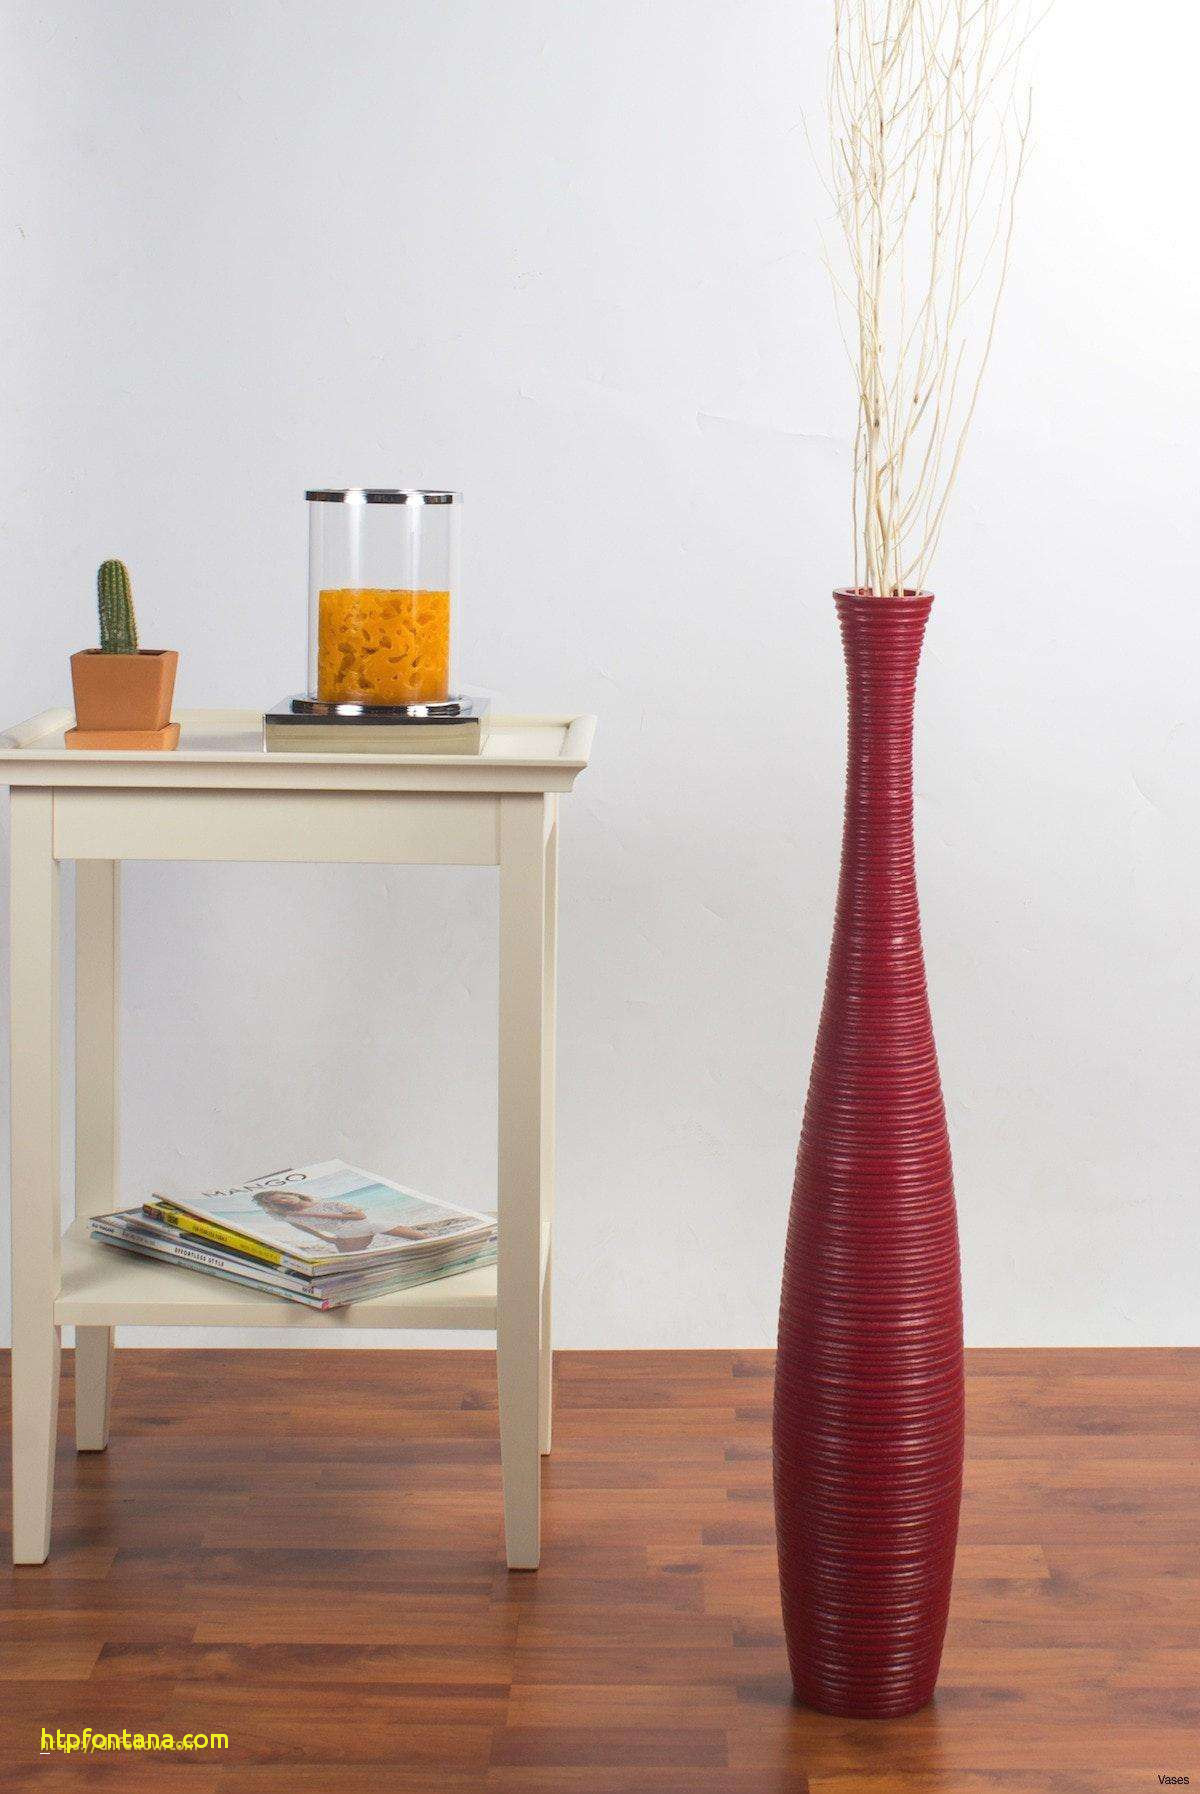 20 Perfect Sand Art Glass Vases 2024 free download sand art glass vases of photograph of modern red vase vases artificial plants collection with modern red vase image beautiful yellow living room mucsat of photograph of modern red vase